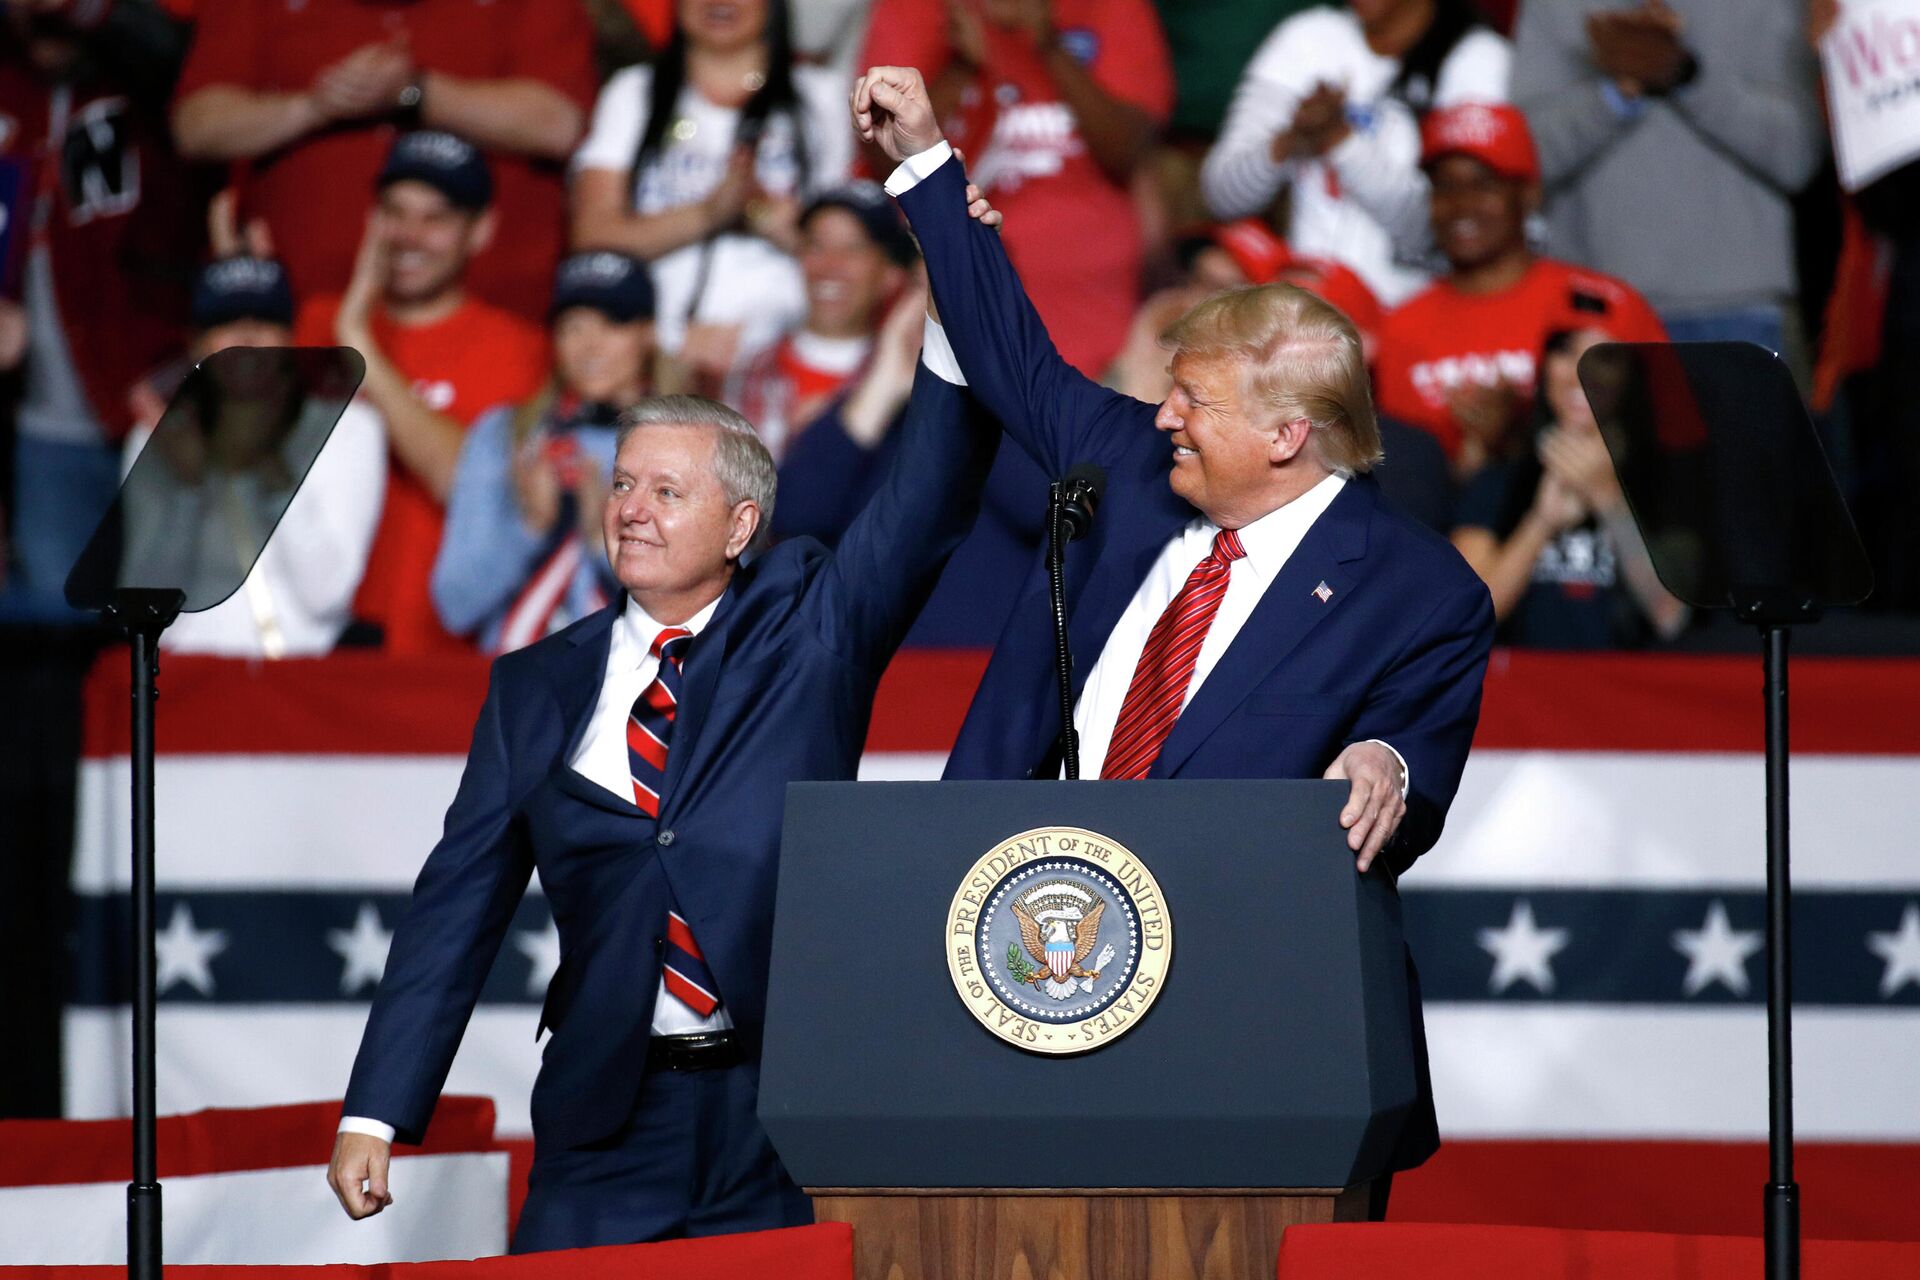 In this Feb. 28, 2020 file photo, Sen. Lindsey Graham, R-S.C., left, stands onstage with President Donald Trump during a campaign rally, in North Charleston, S.C. Jaime Harrison has raised more money than his Republican opponent, Sen. Lindsey Graham, two quarters in a row.  - Sputnik International, 1920, 14.02.2022